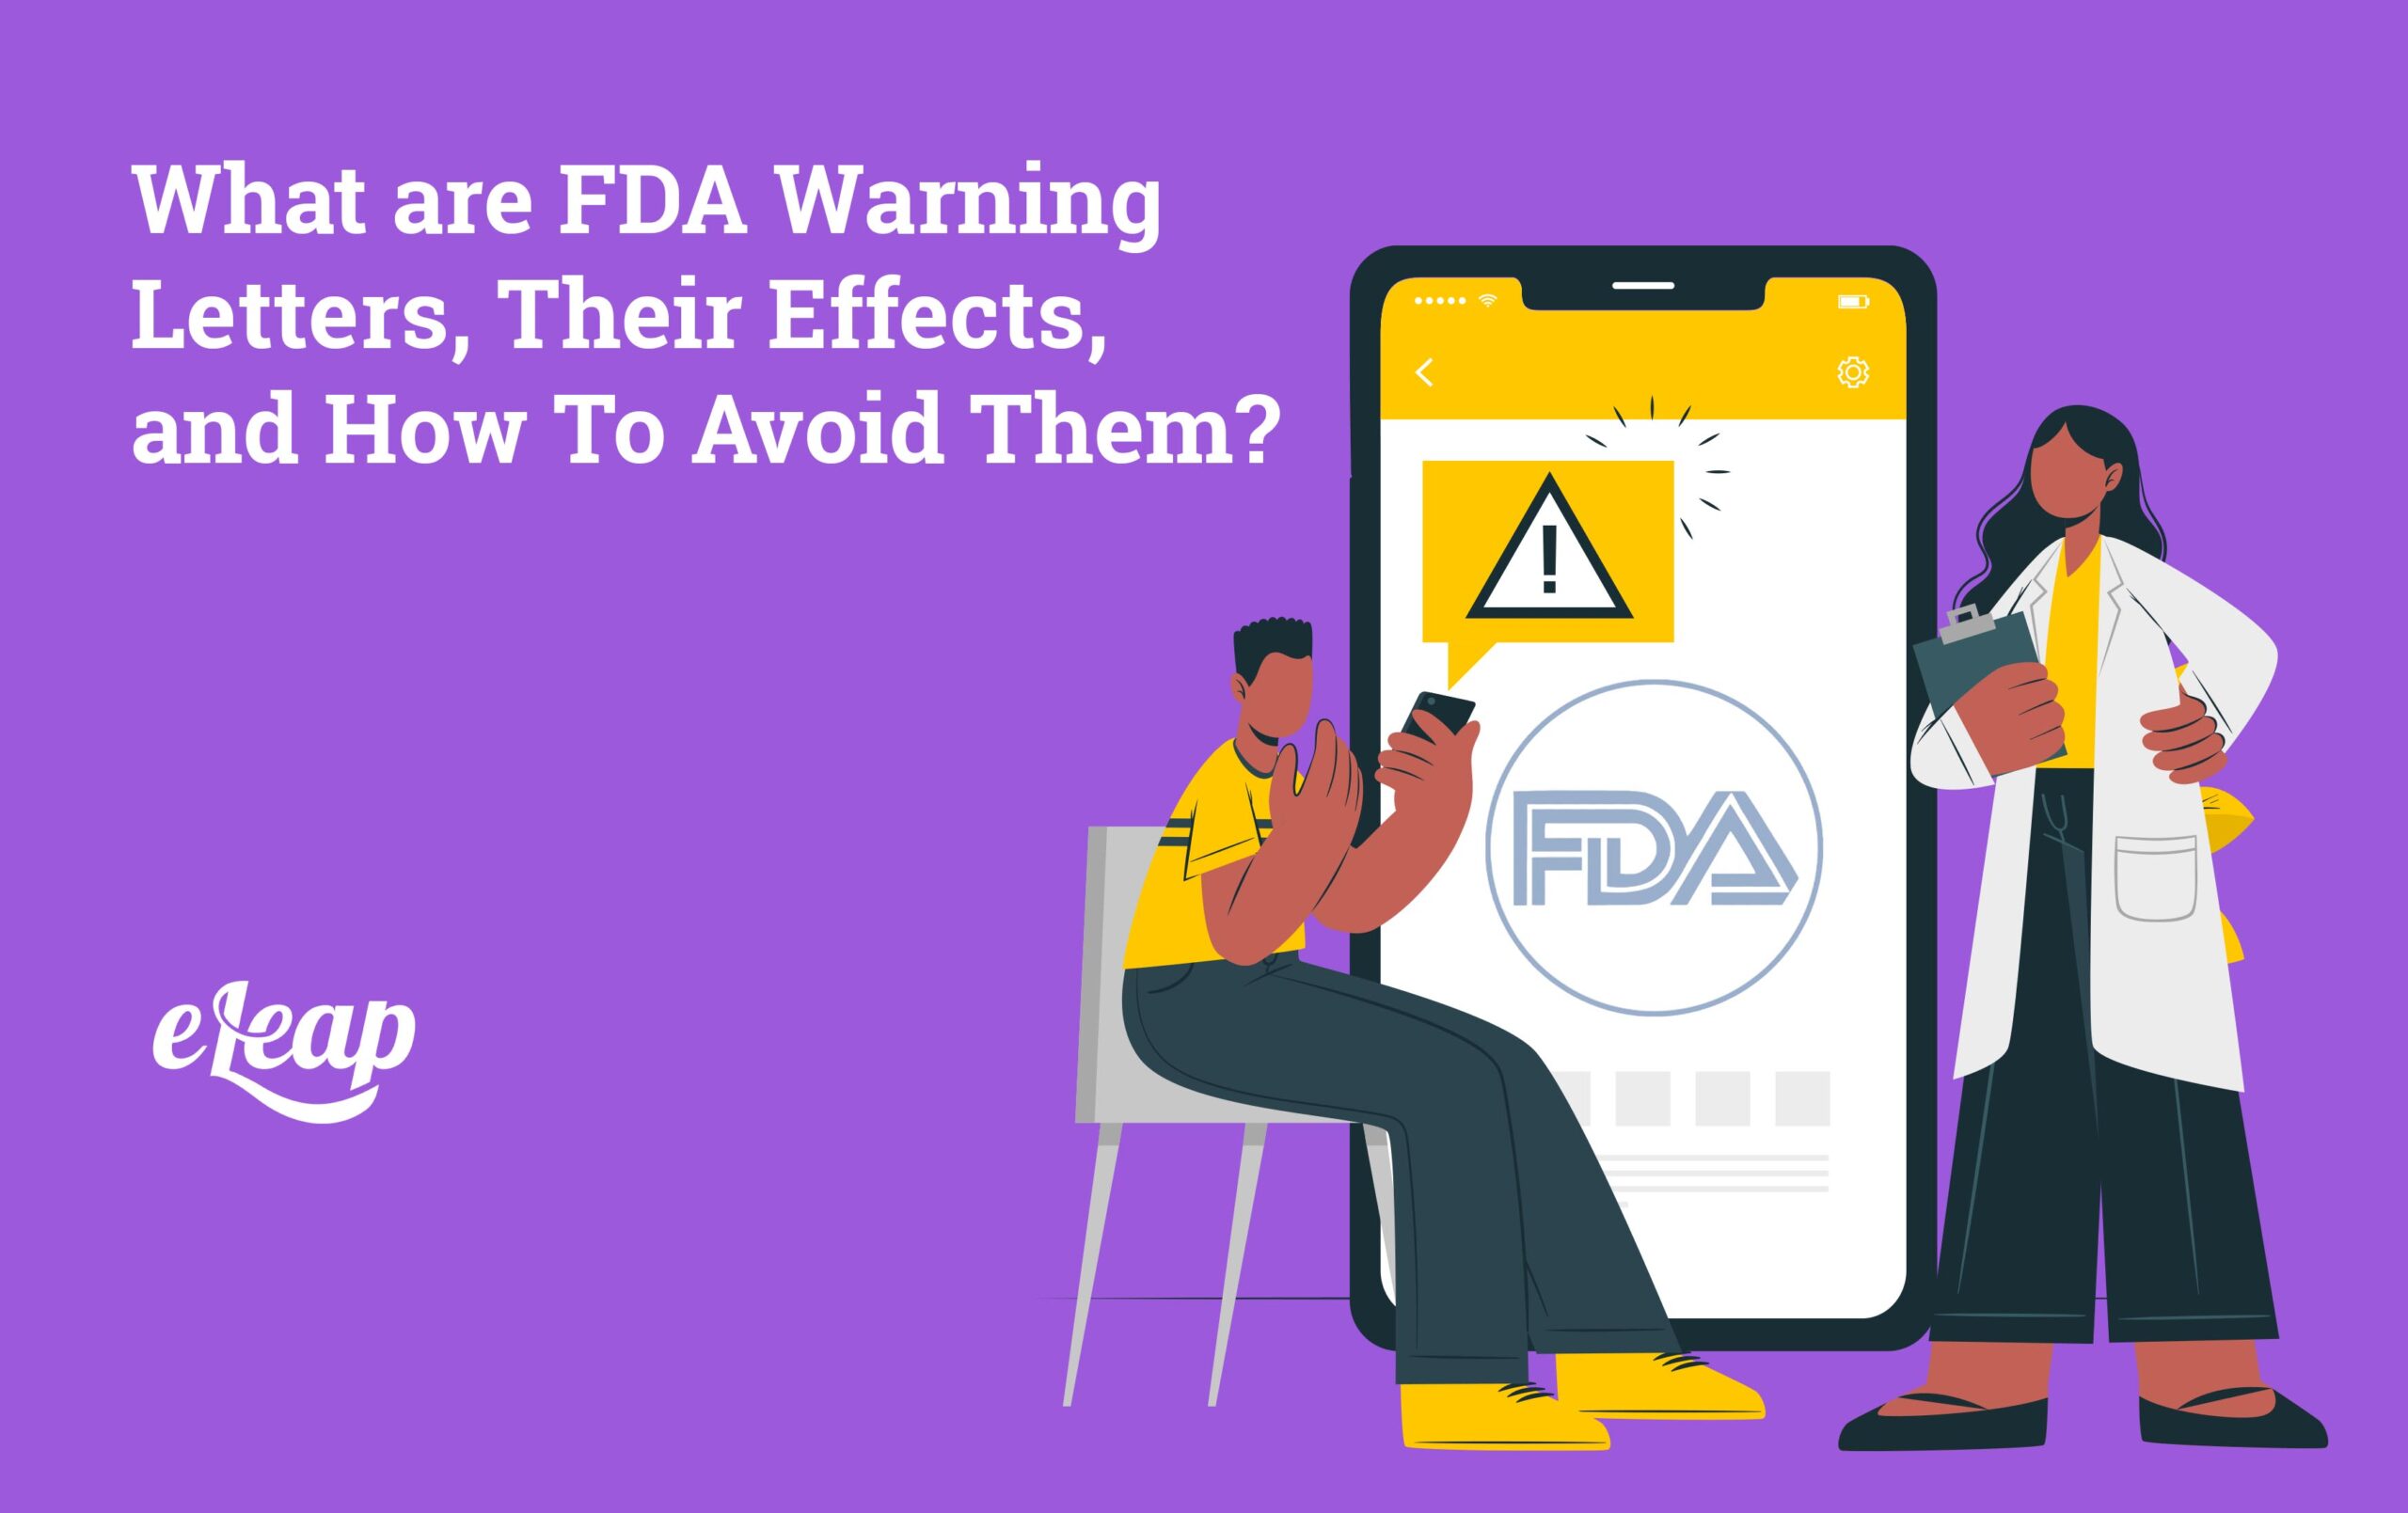 What are FDA Warning Letters, Their Effects, and How To Avoid Them?